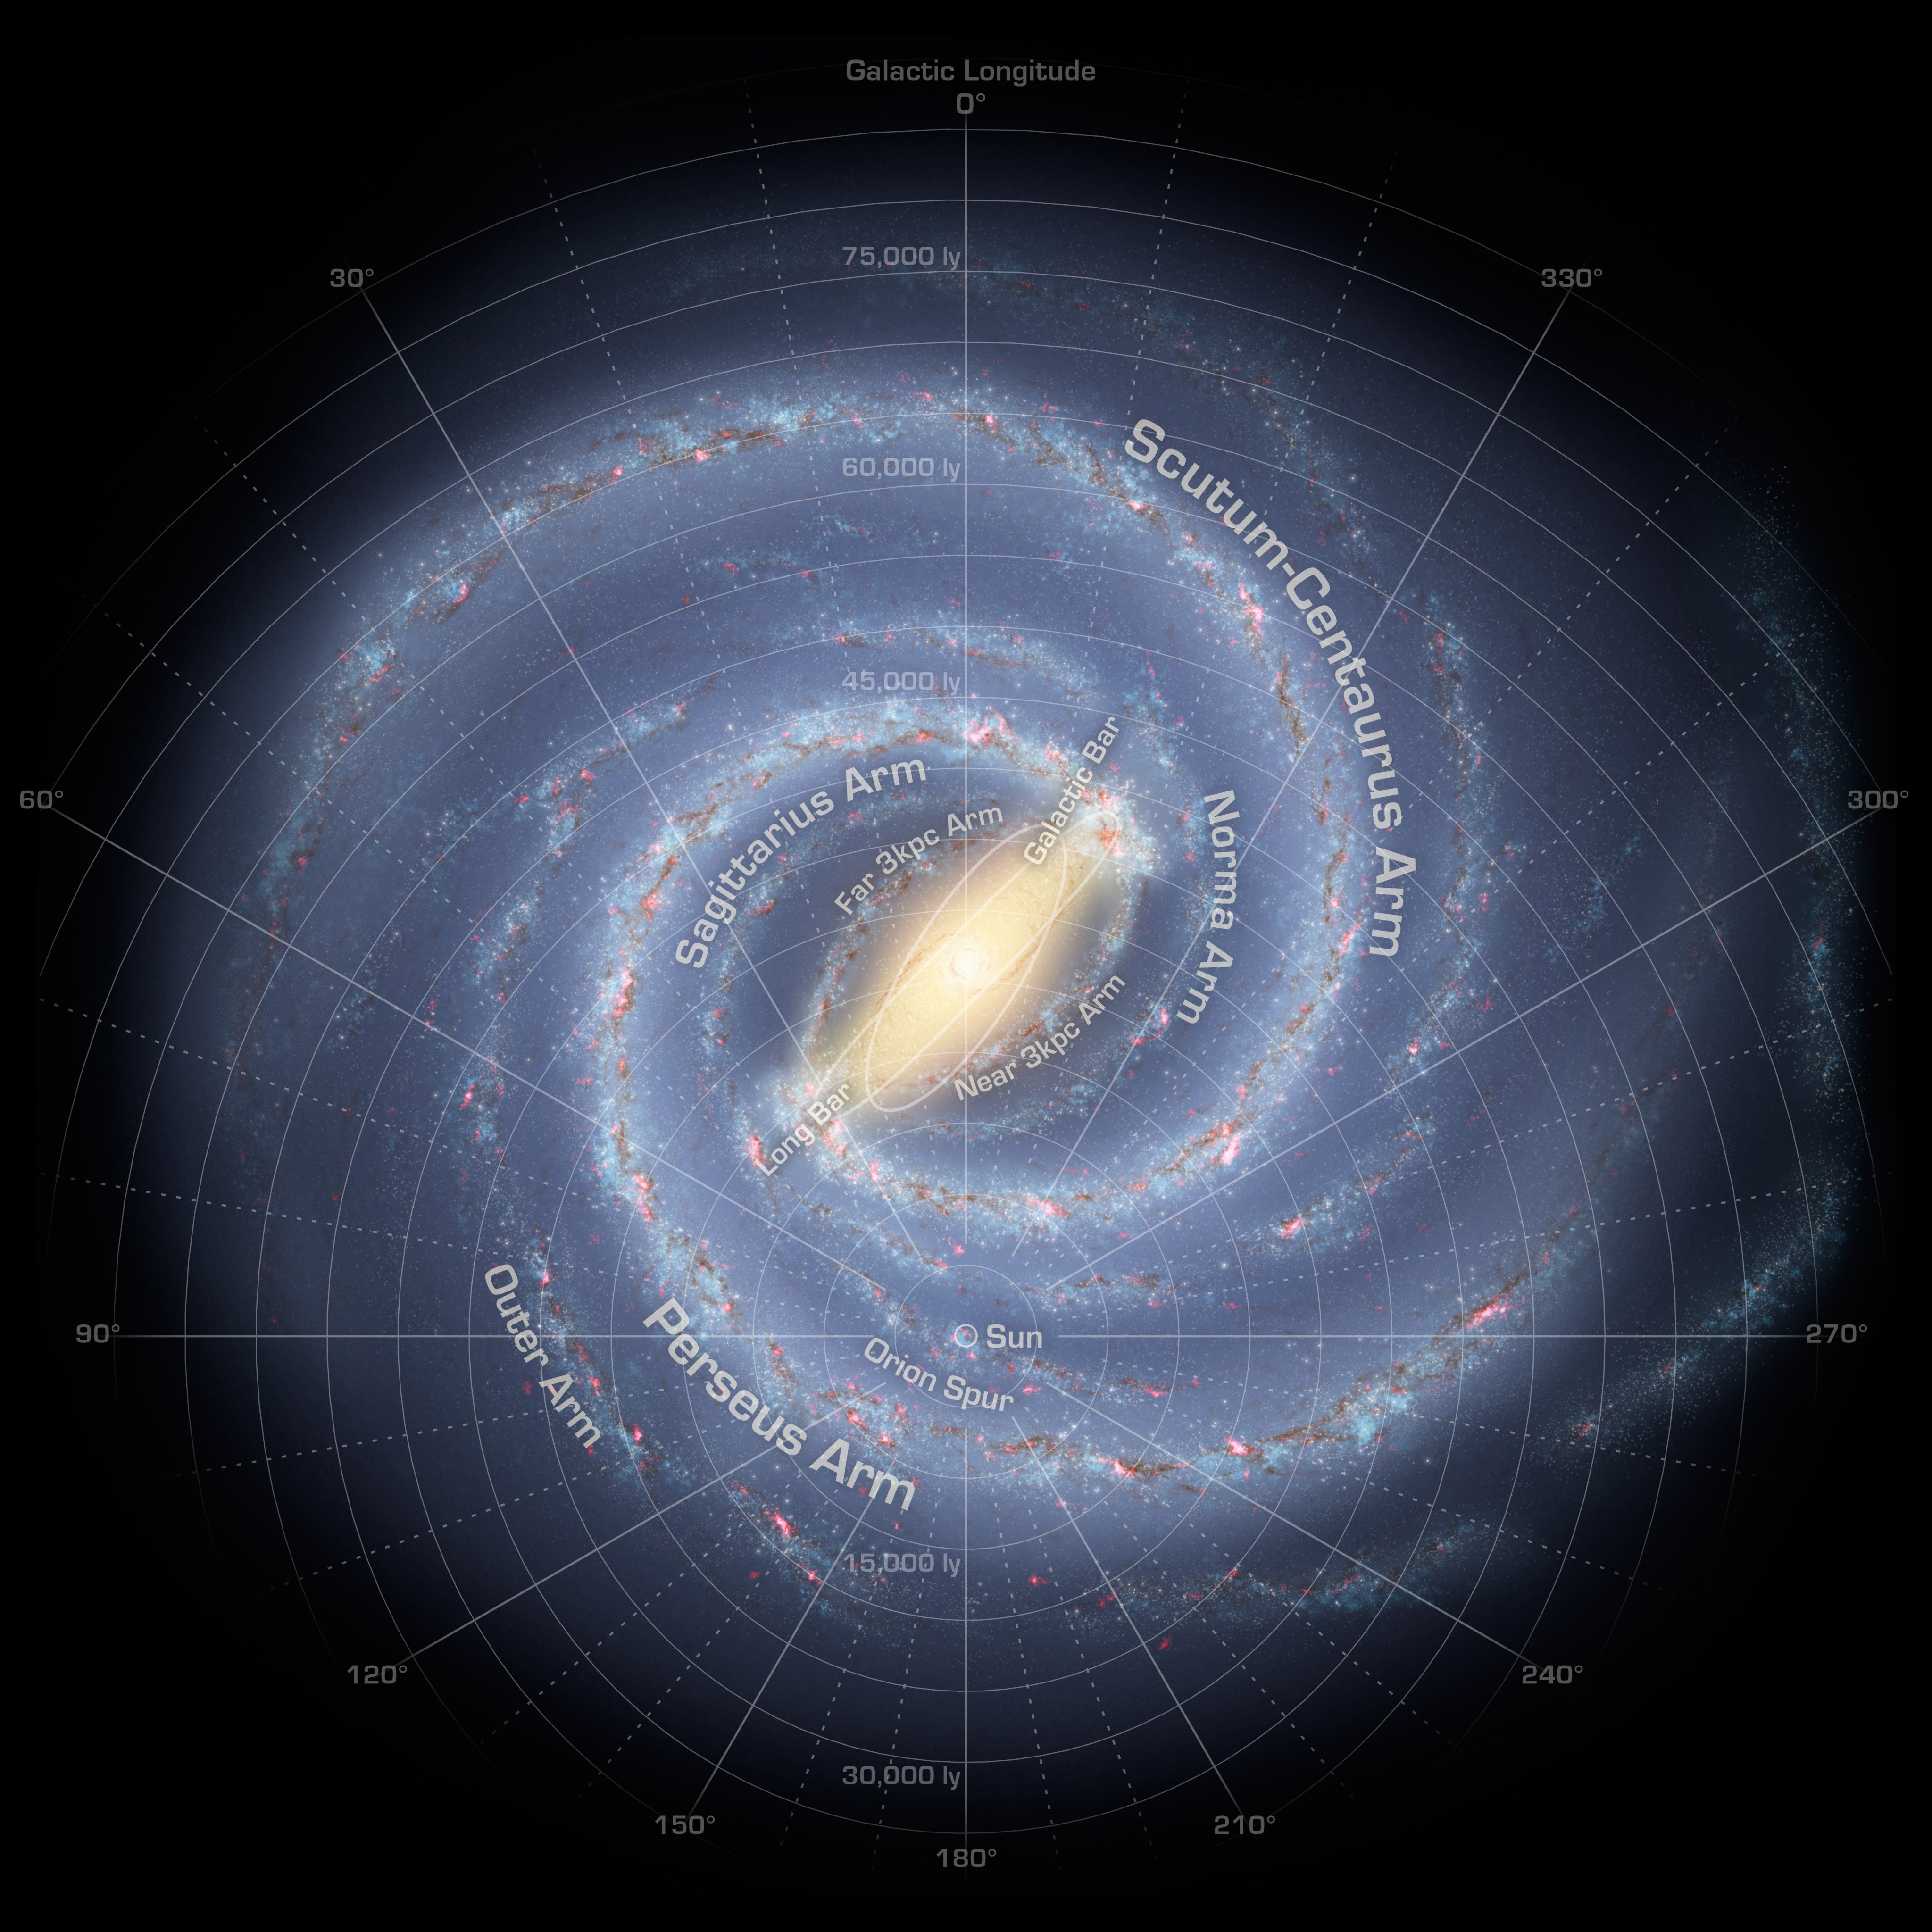 The Milky Way: Understanding Our Place in the Galaxy